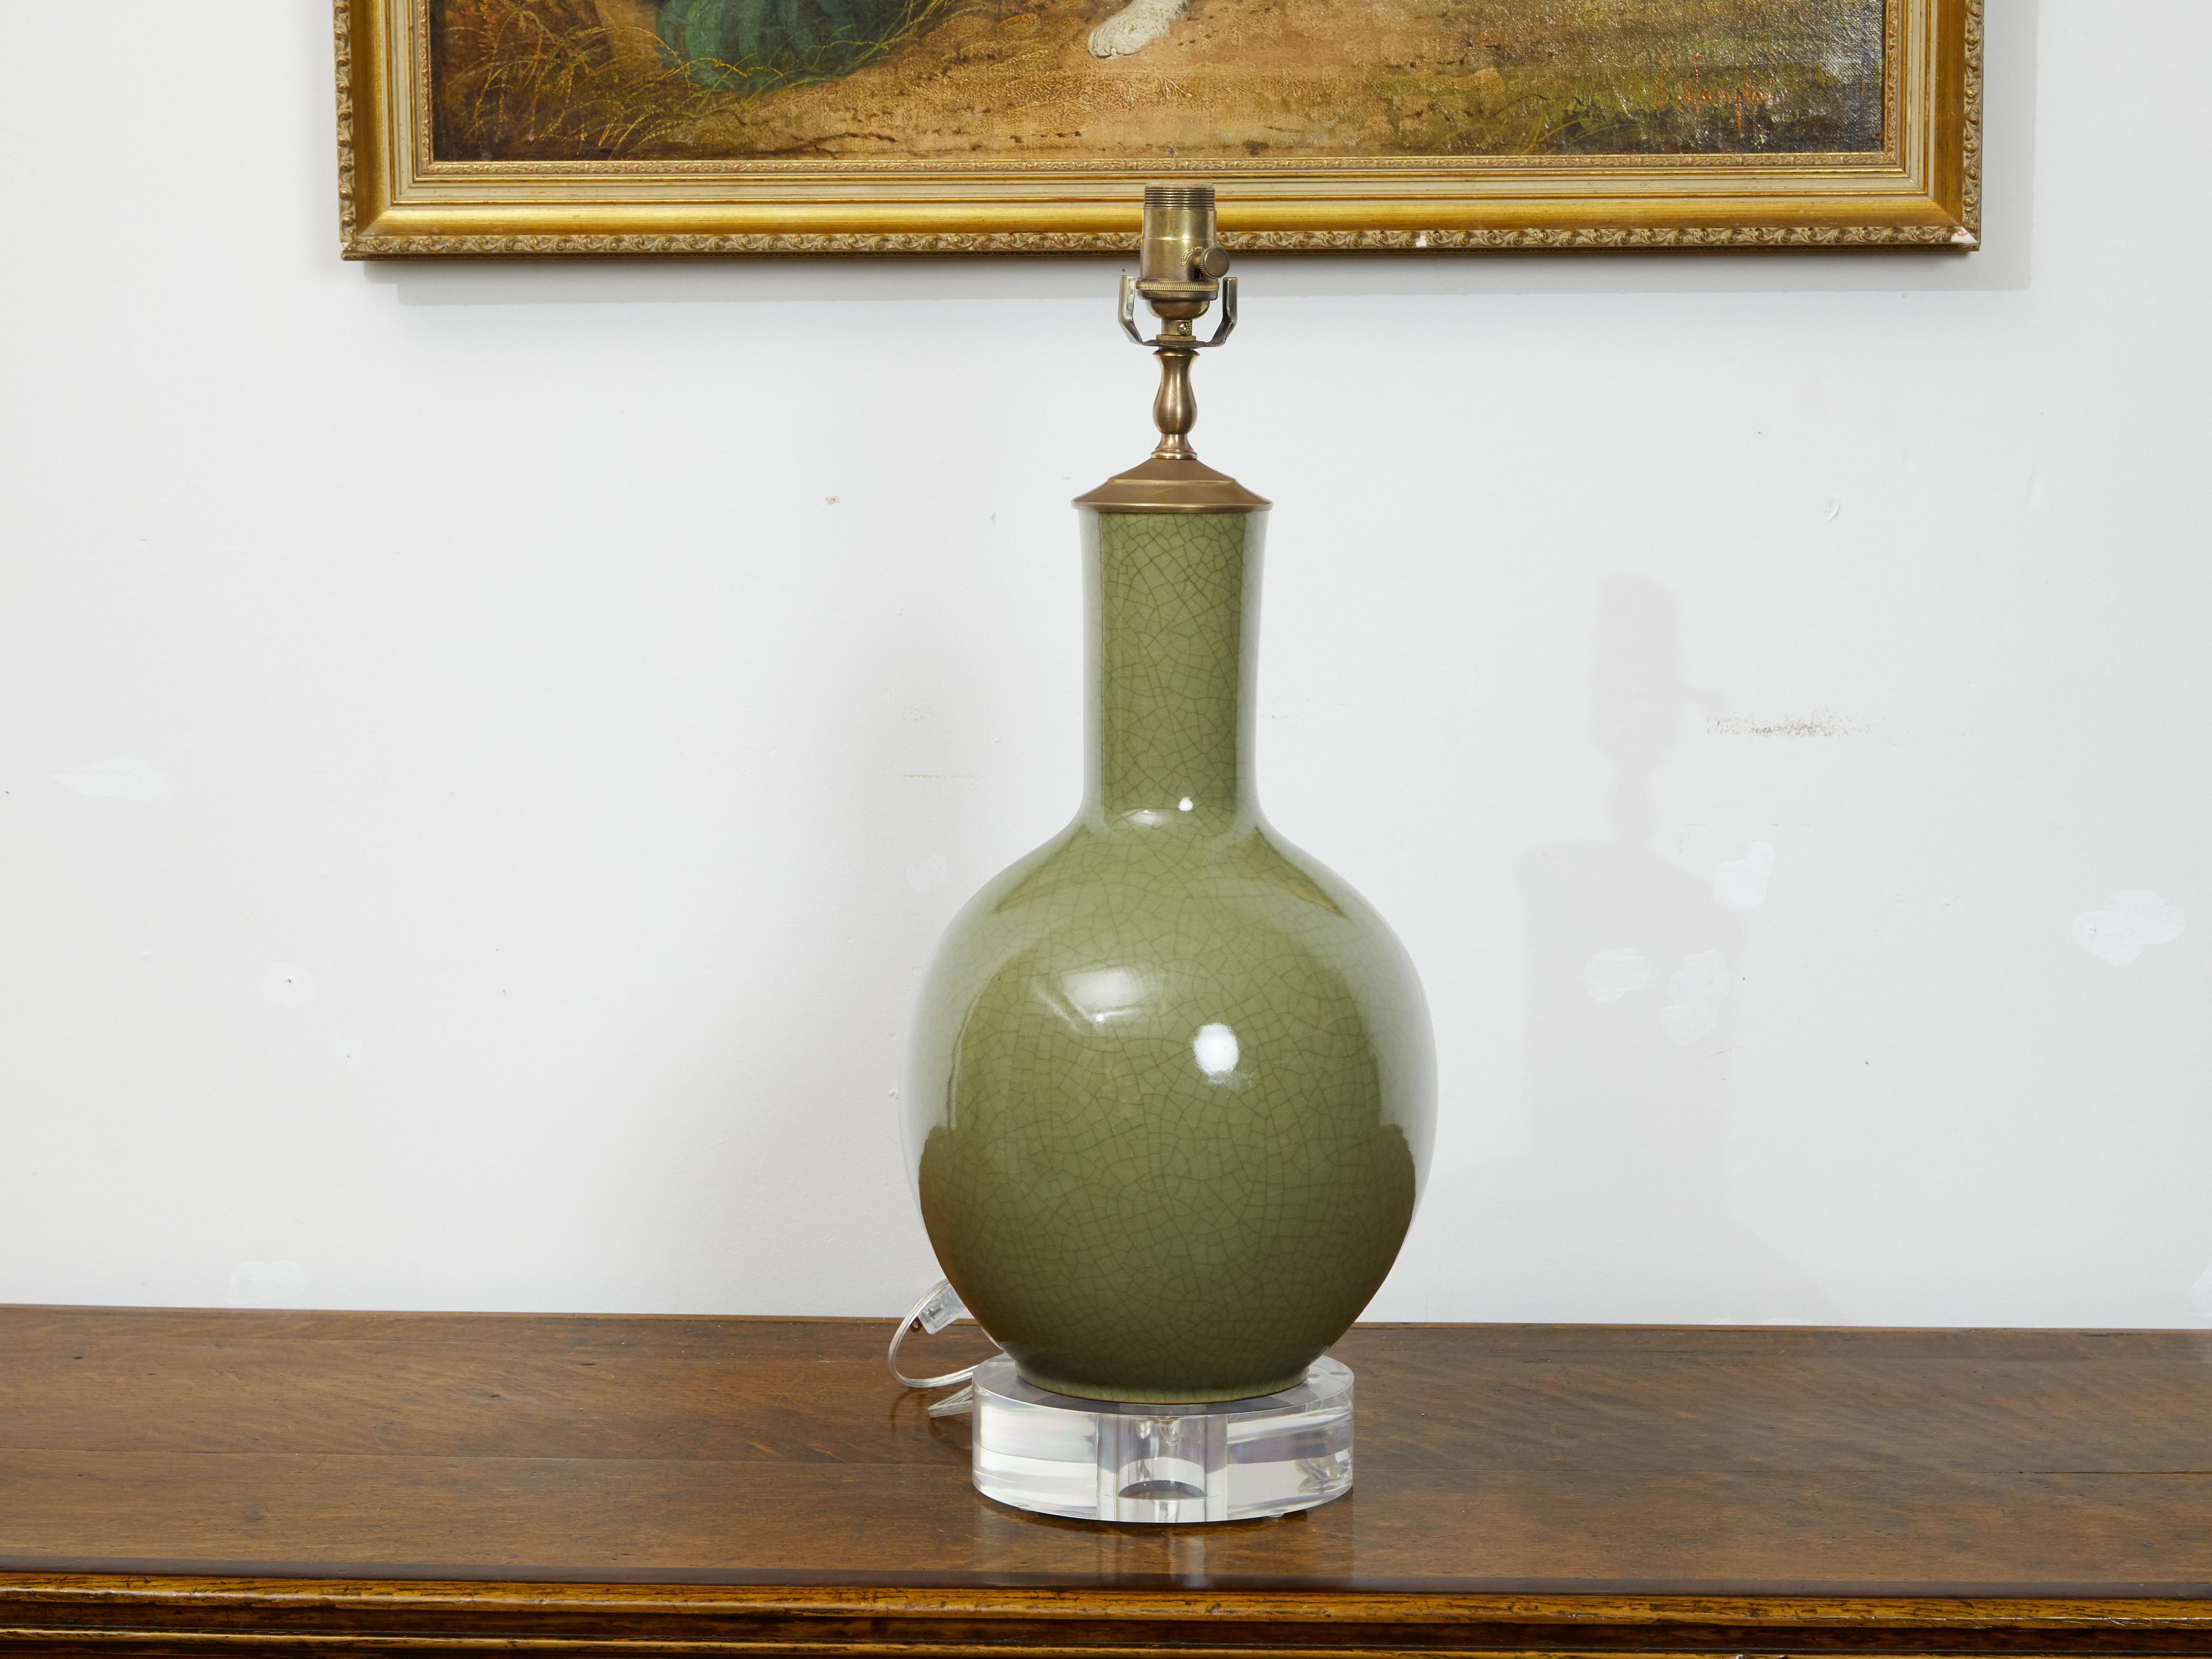 An English porcelain table lamp from the mid 20th century, with circular lucite base. Created in England during the second quarter of the 20th century, this porcelain lamp features a crackled green circular body with tall and narrow neck, mounted on